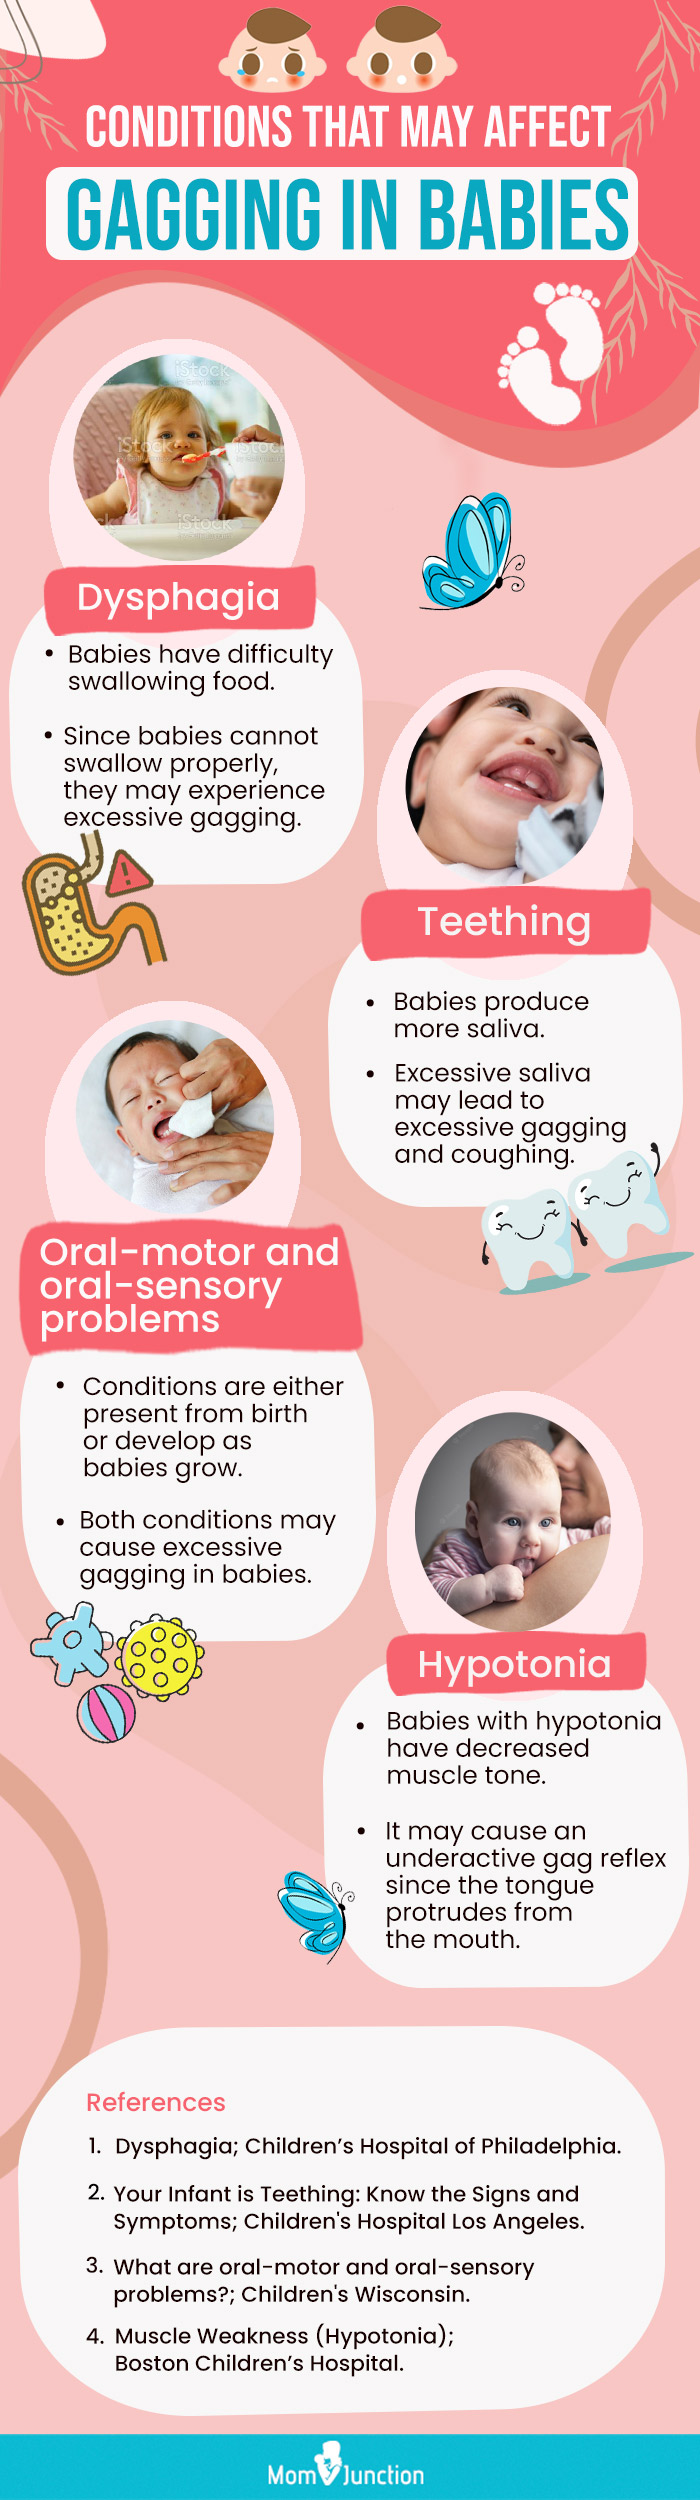 conditions that may affect gagging in babies [infographic]